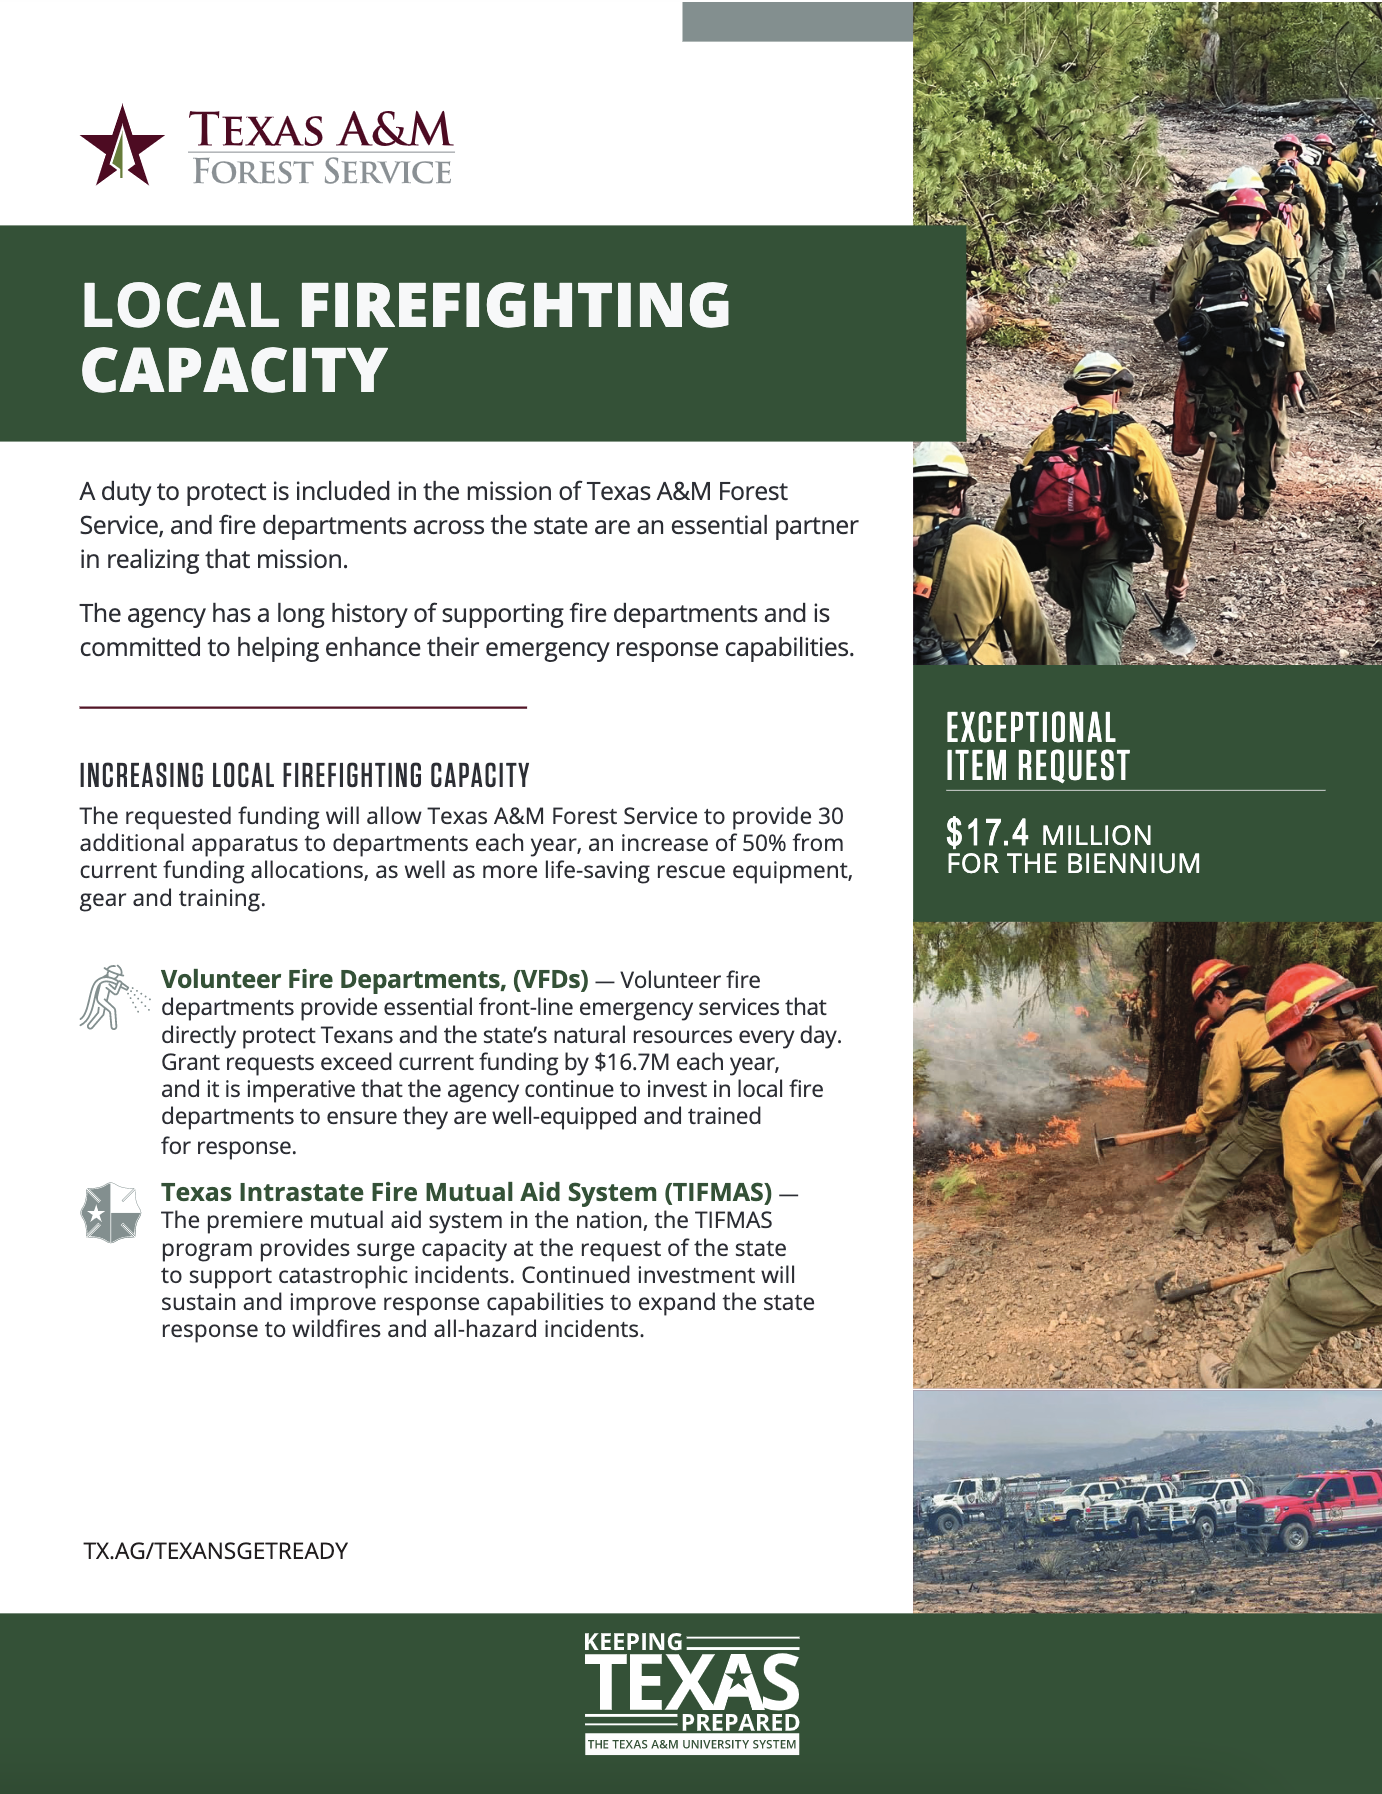 Cover image of one pager outlining Texas A&M Forest Service legislative exceptional item request to support increasing local firefighting capacity.